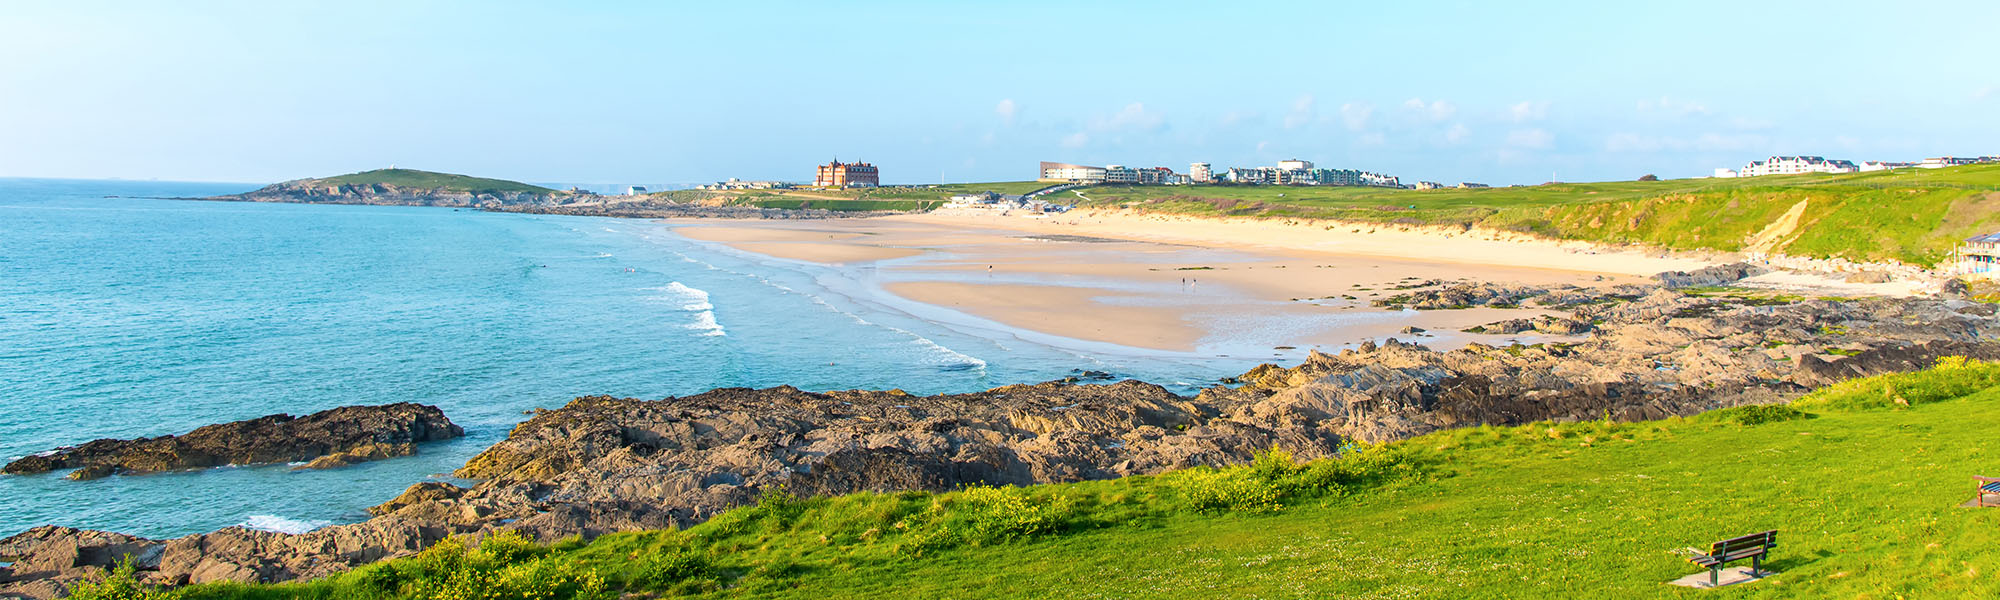 tourhub | Just Go Holidays | St Ives, The Isles of Scilly & South Cornwall - JG Explorer 